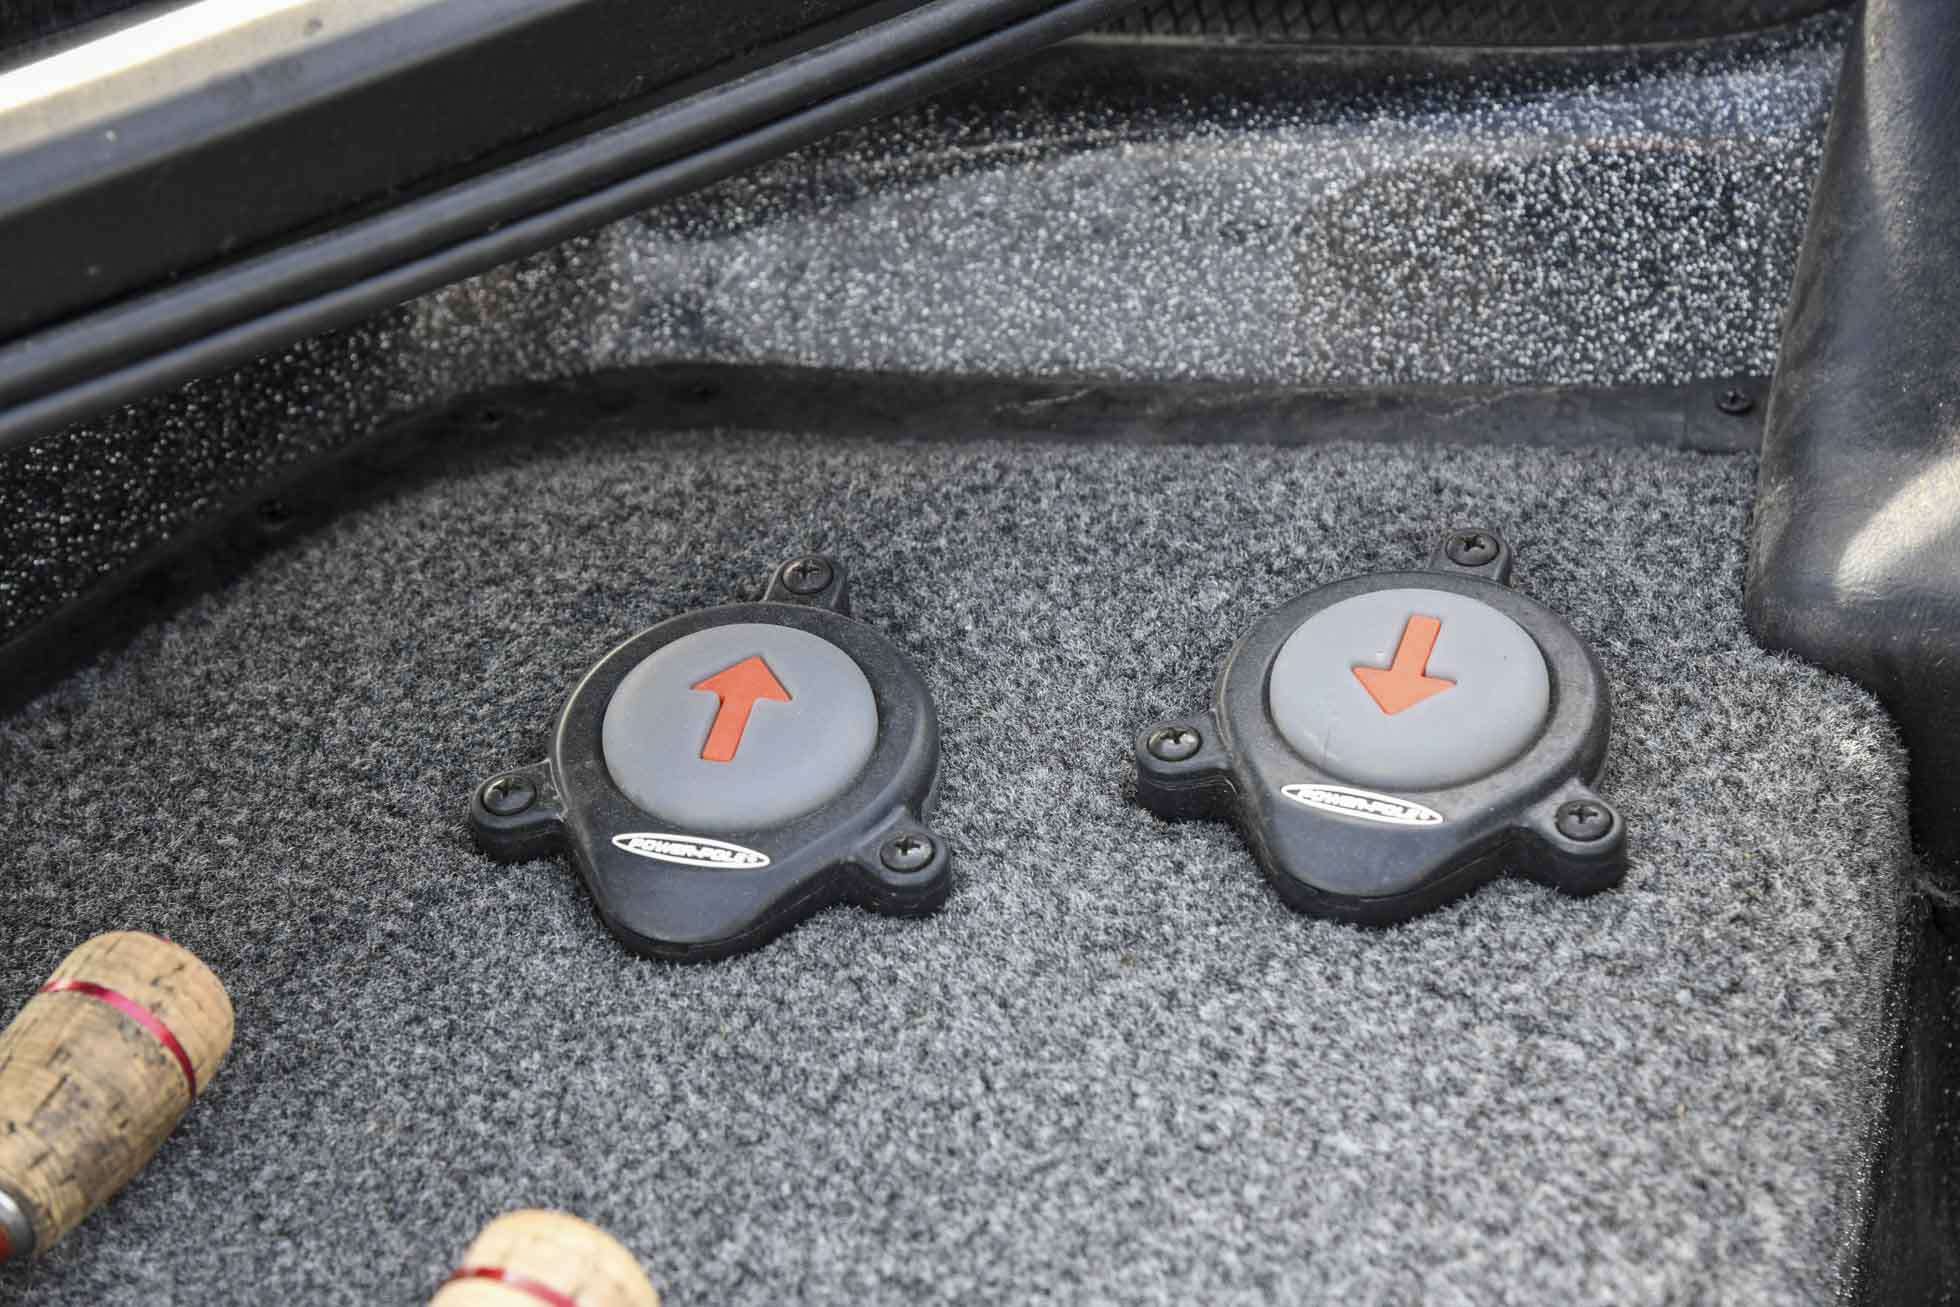 Power-Pole foot controls are placed to the left of the trolling motor foot pedal so they are out of the way while remaining accessible.